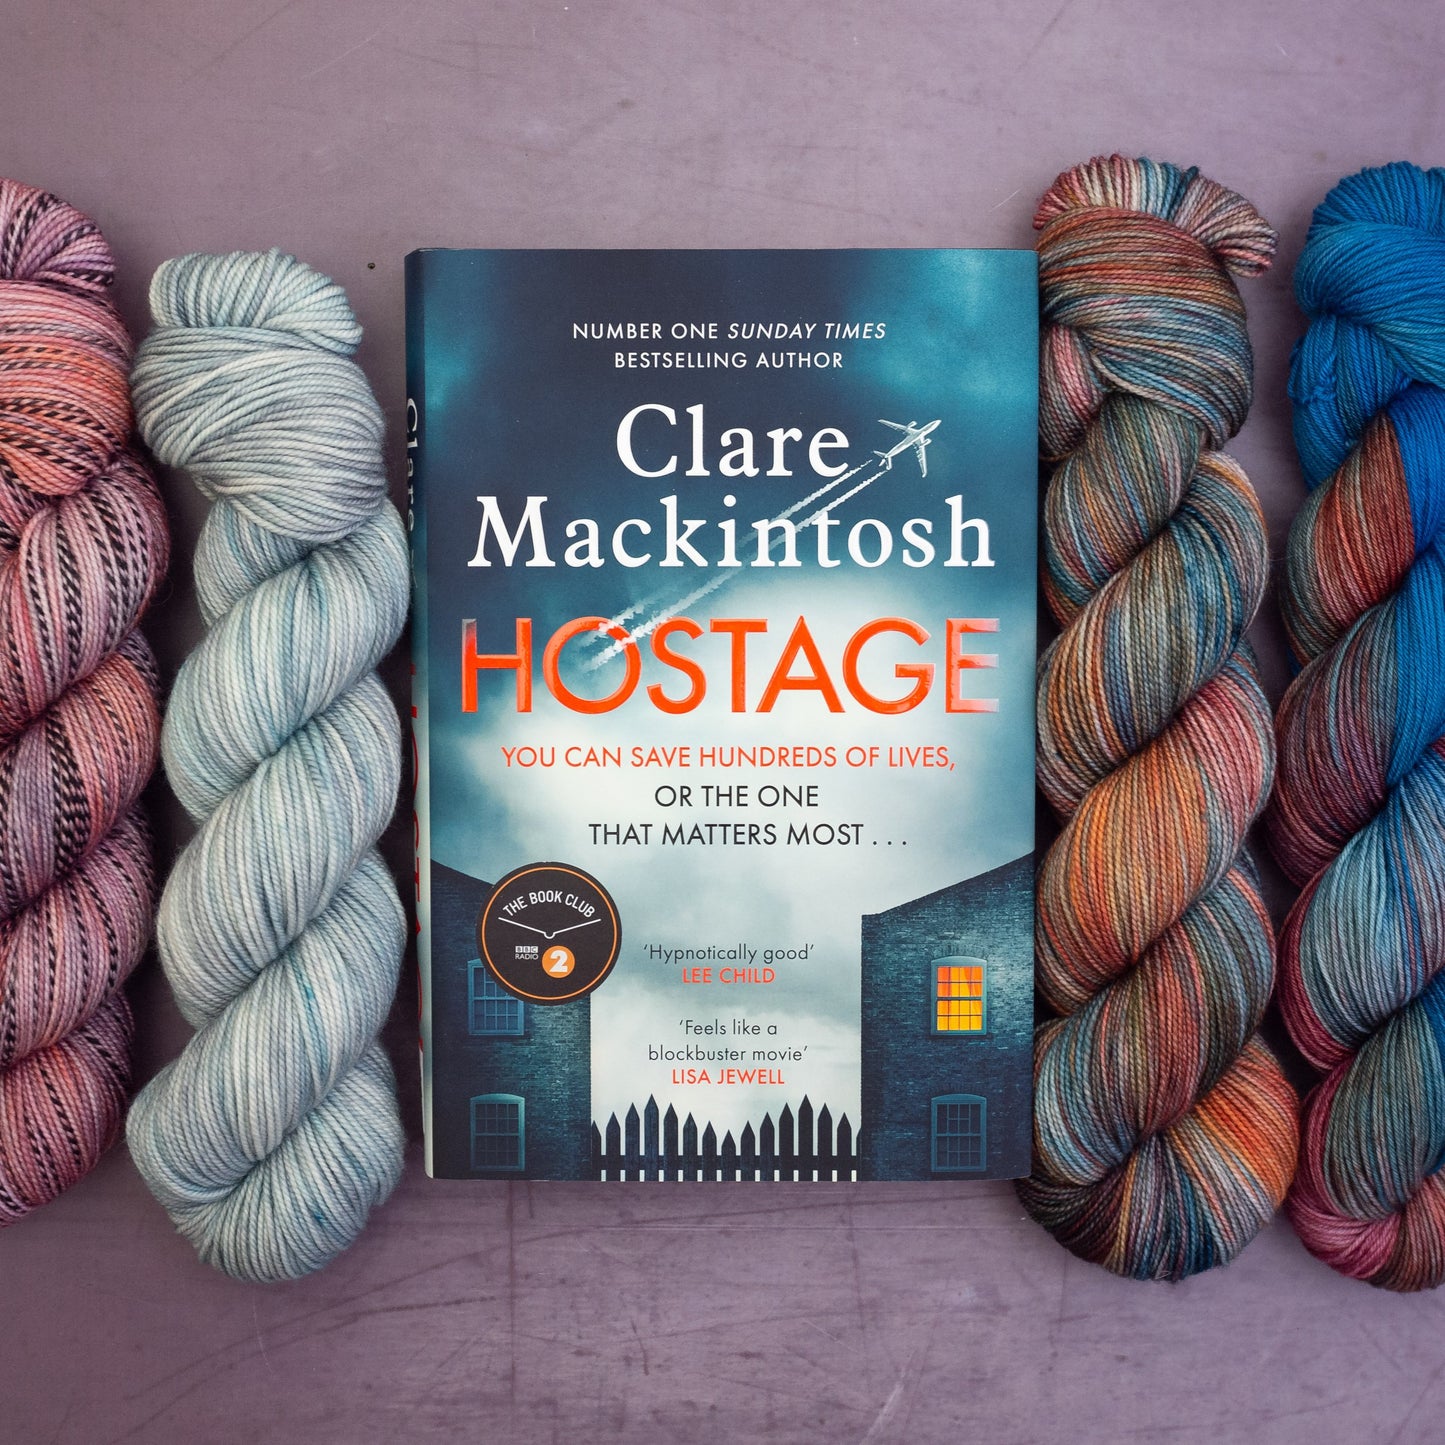 'currently reading' : Hostage by Clare Mackintosh